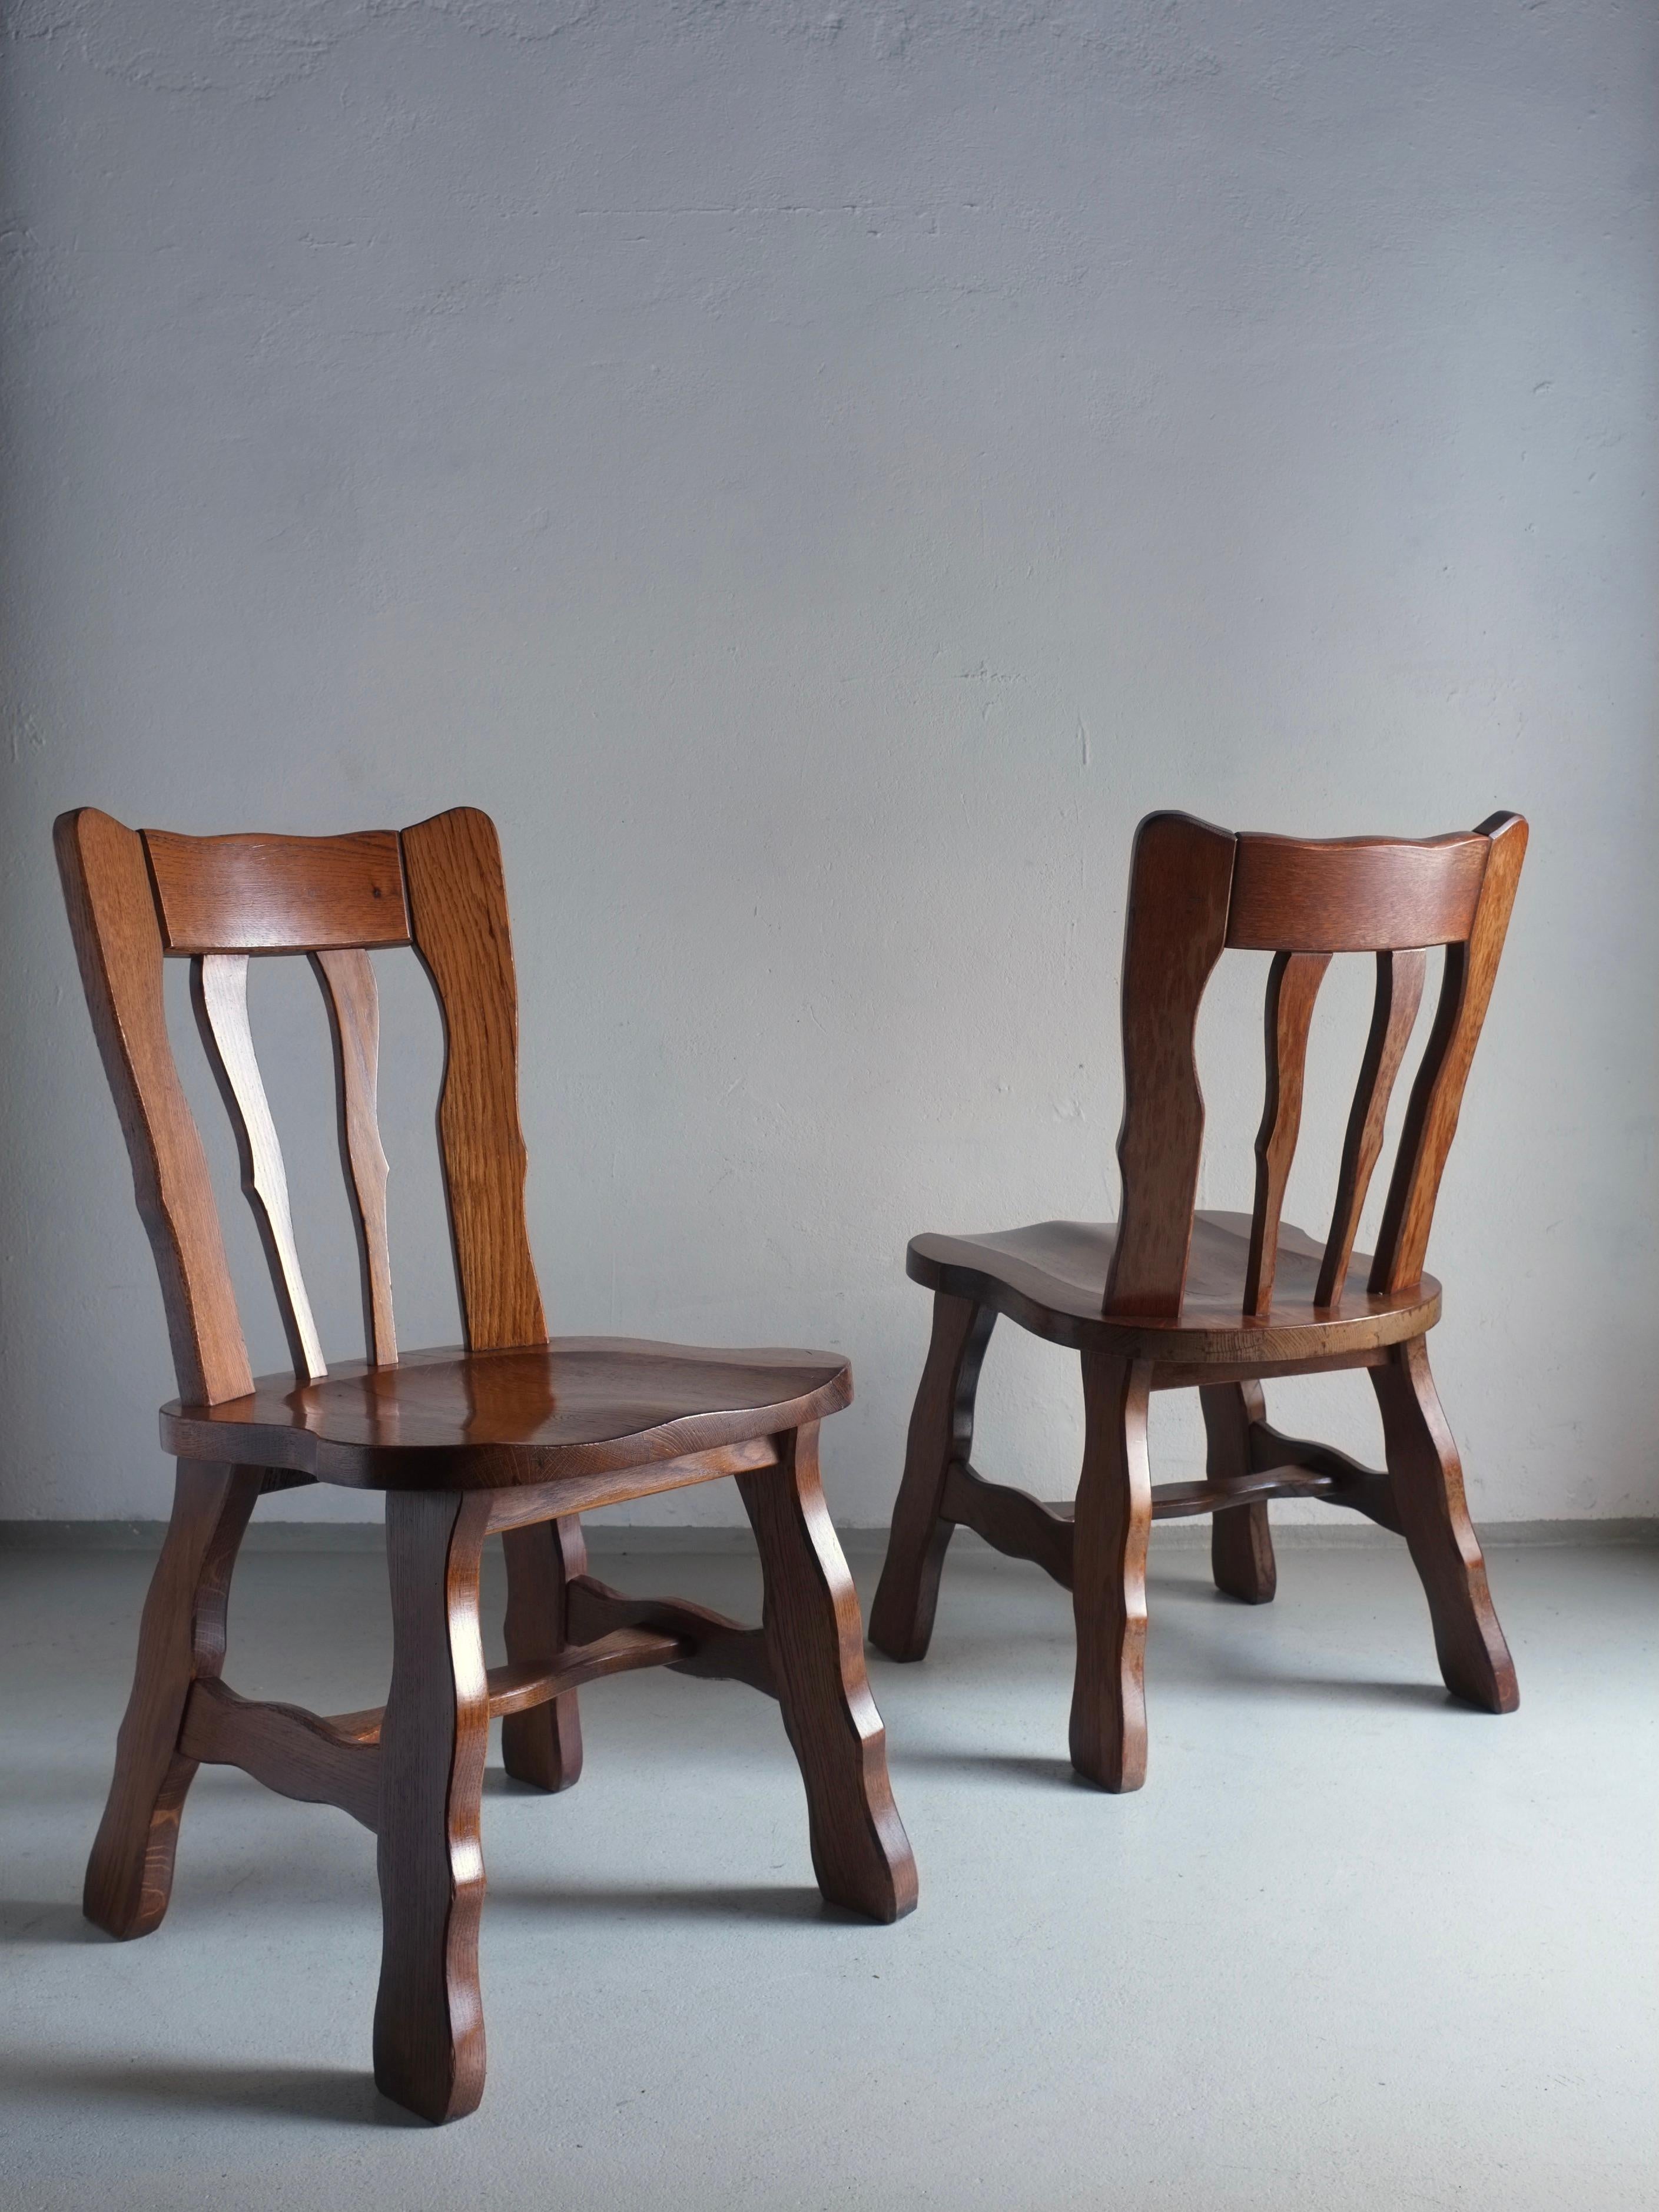 Set of 2 brutalist oak chairs with carved details, very heavy and stable.

Additional information:
Country of manufacture: Belgium
Period: 1970s
Dimensions: W 45.5 cm x D 51 cm x H 87 cm, H(seat) 44 cm
Condition: Good vintage condition